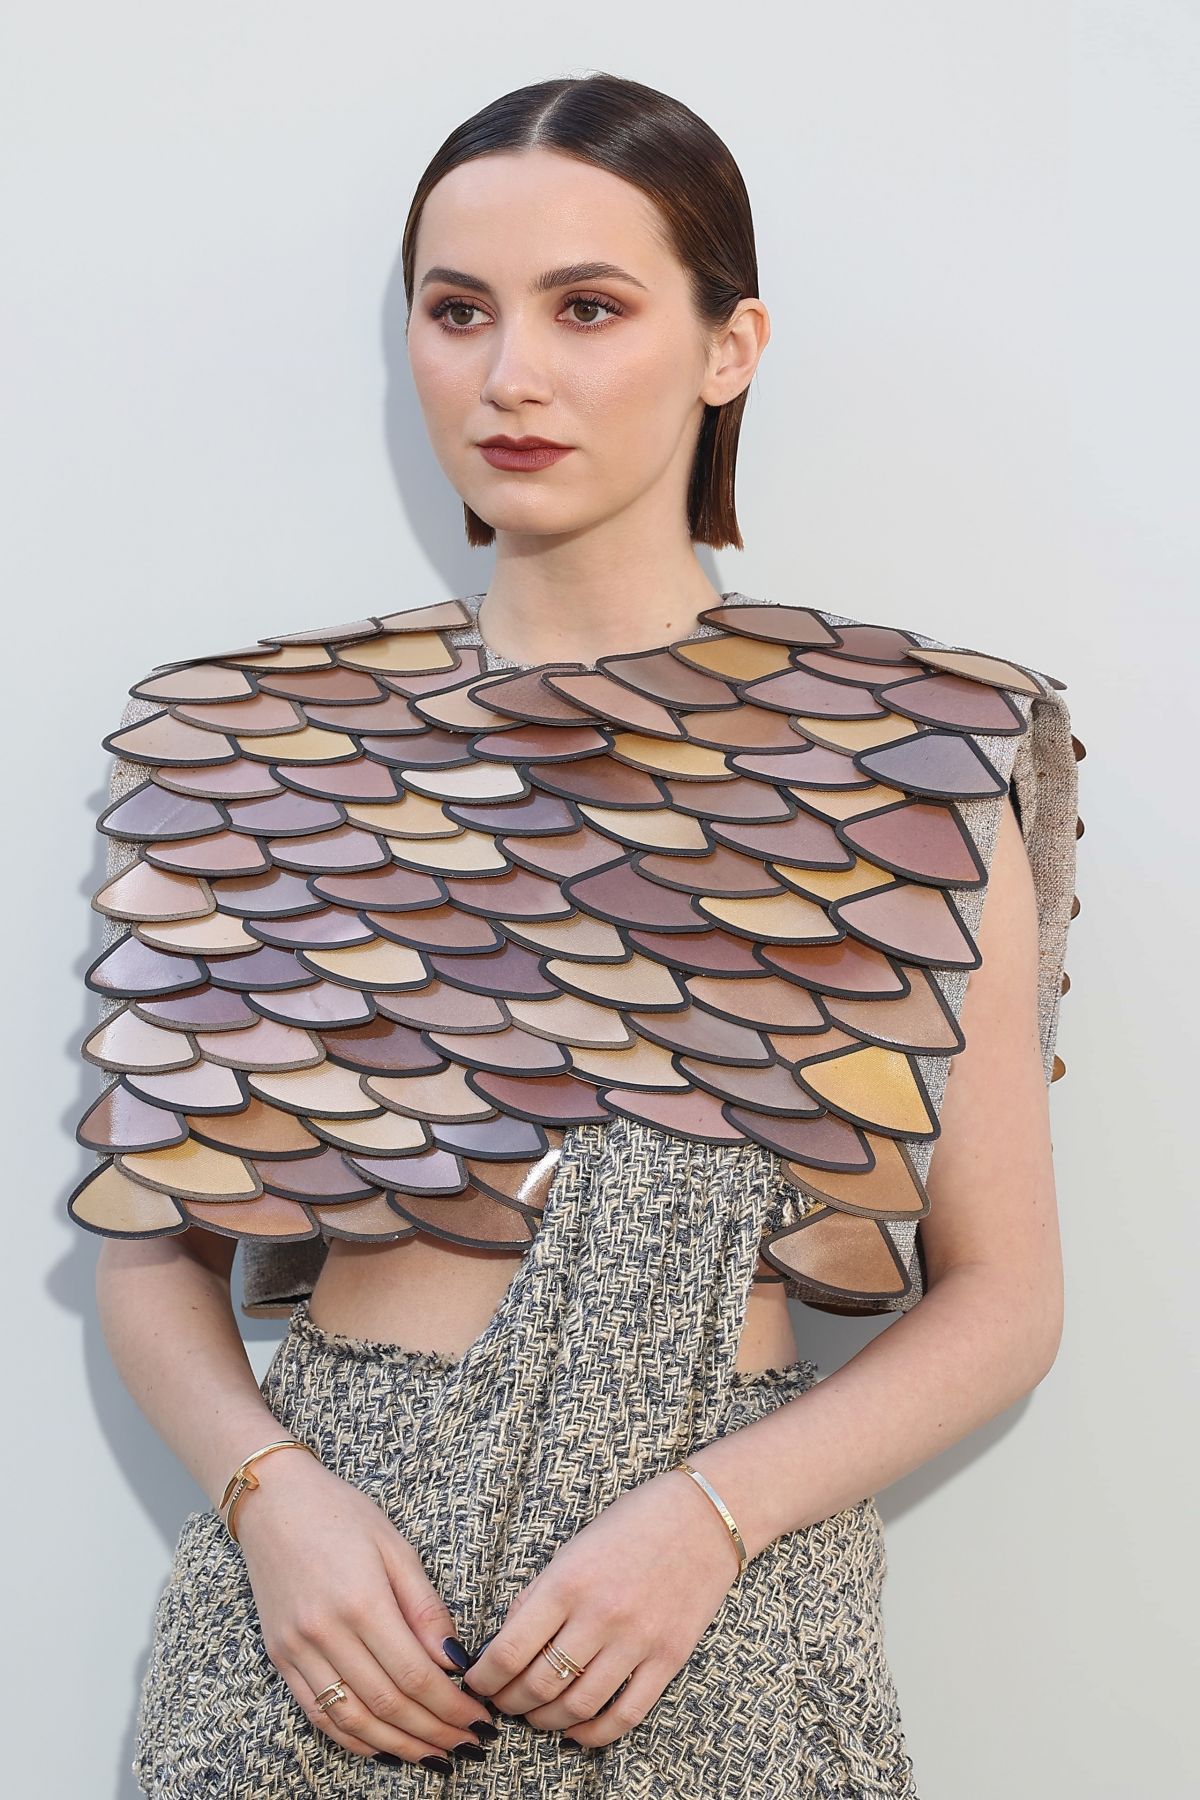 Maude Apatow Louis Vuitton Fashion Show October 4, 2022 – Star Style